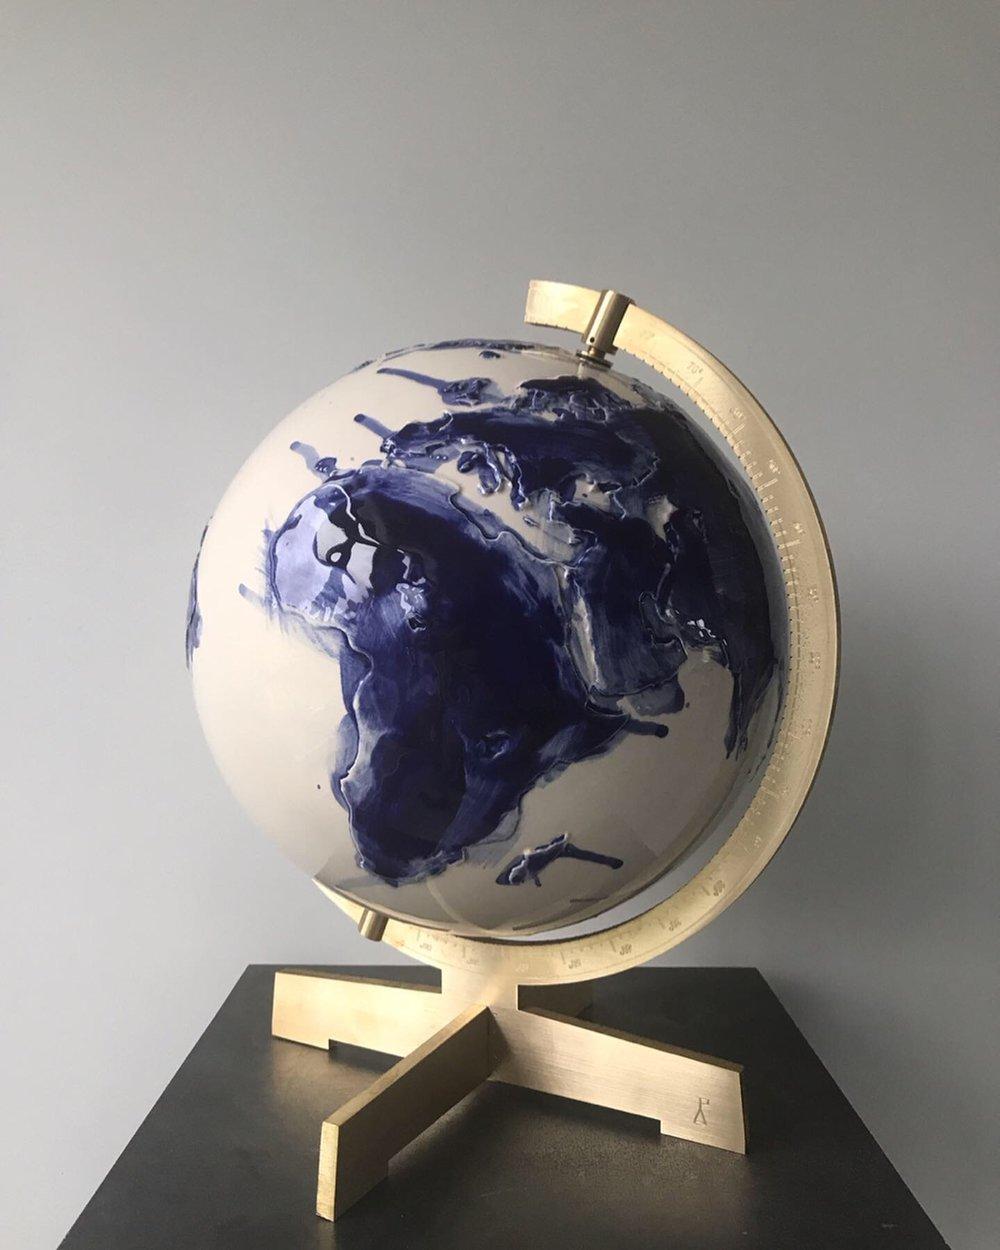 Unique Earth globe sculpture by Alex de Witte
Each one is unique, hand-sculpted by Alex de Witte
Limited edition of 99 pieces + 5 ap
Dimensions: H 42cm
Materials: Ceramics and scoured brass, Frame in massive brass


A recognizable planet in a